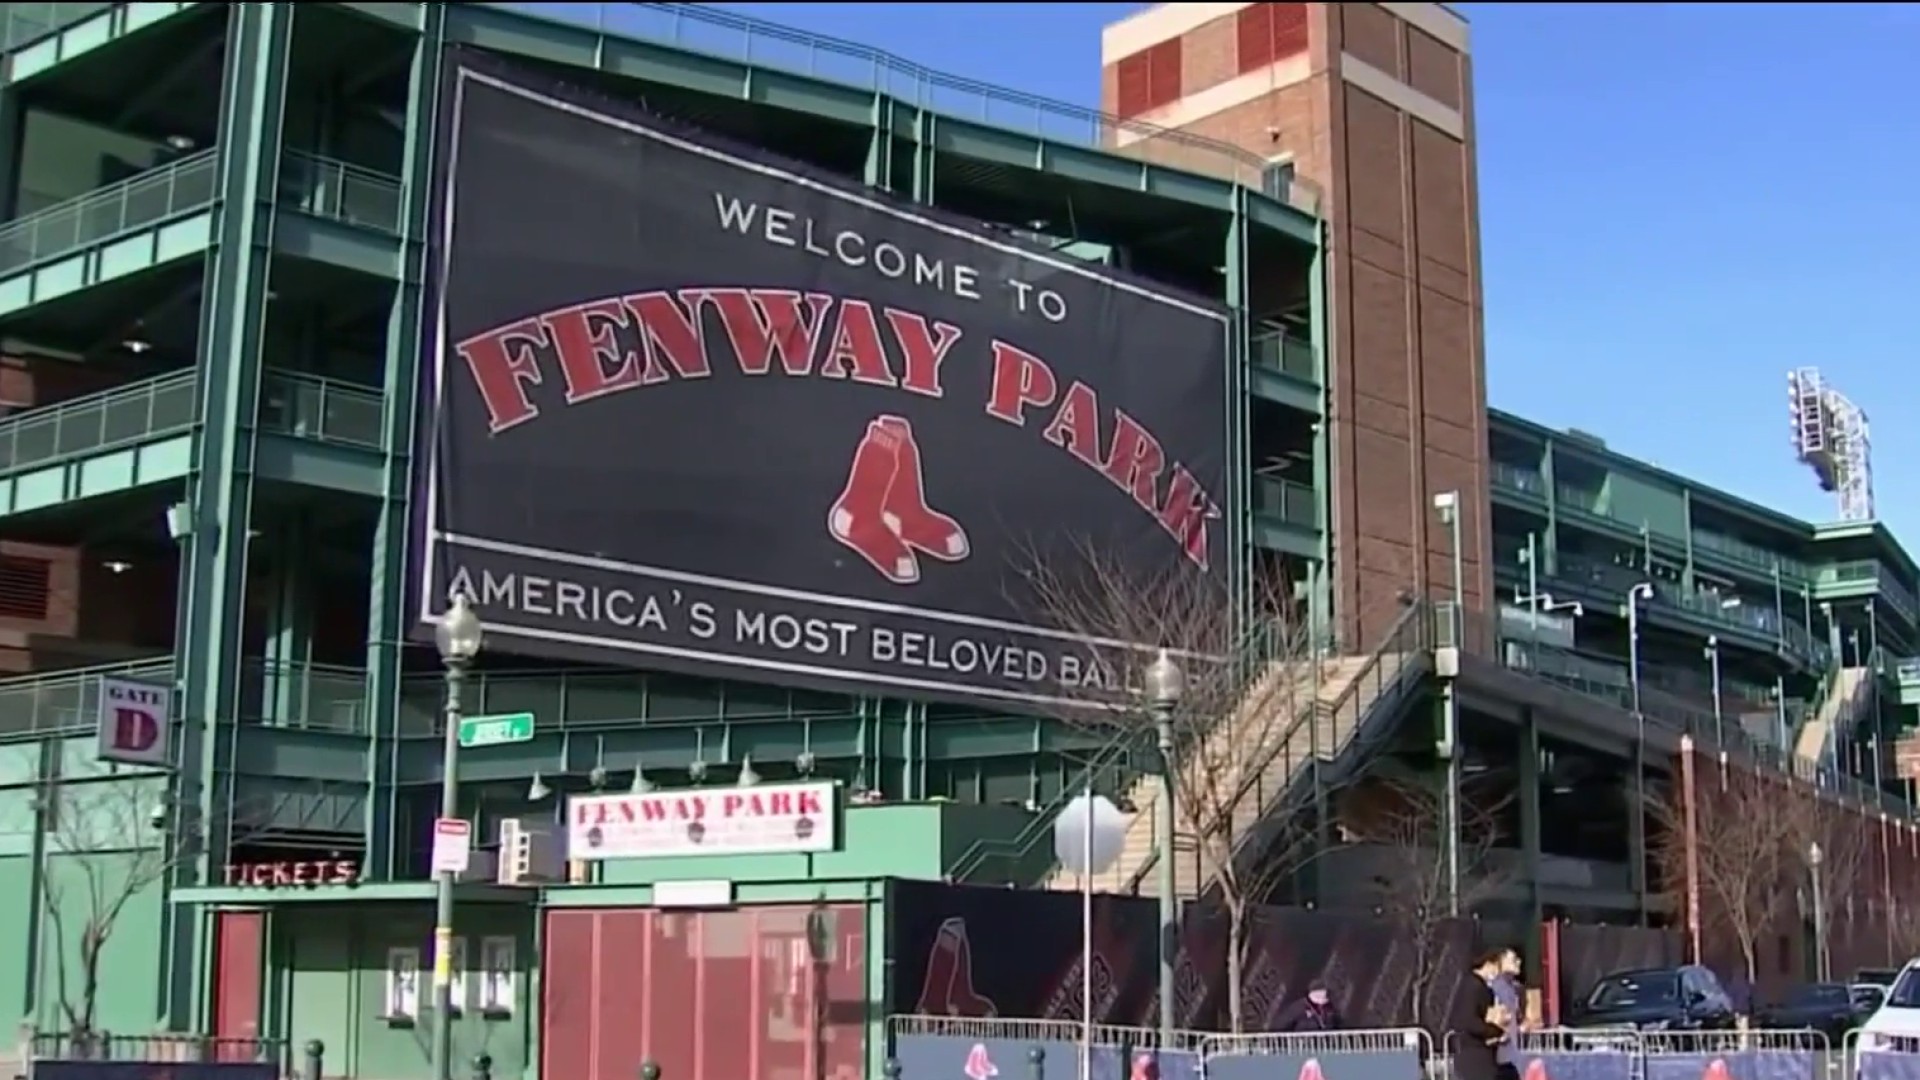 welcome to fenway park sign